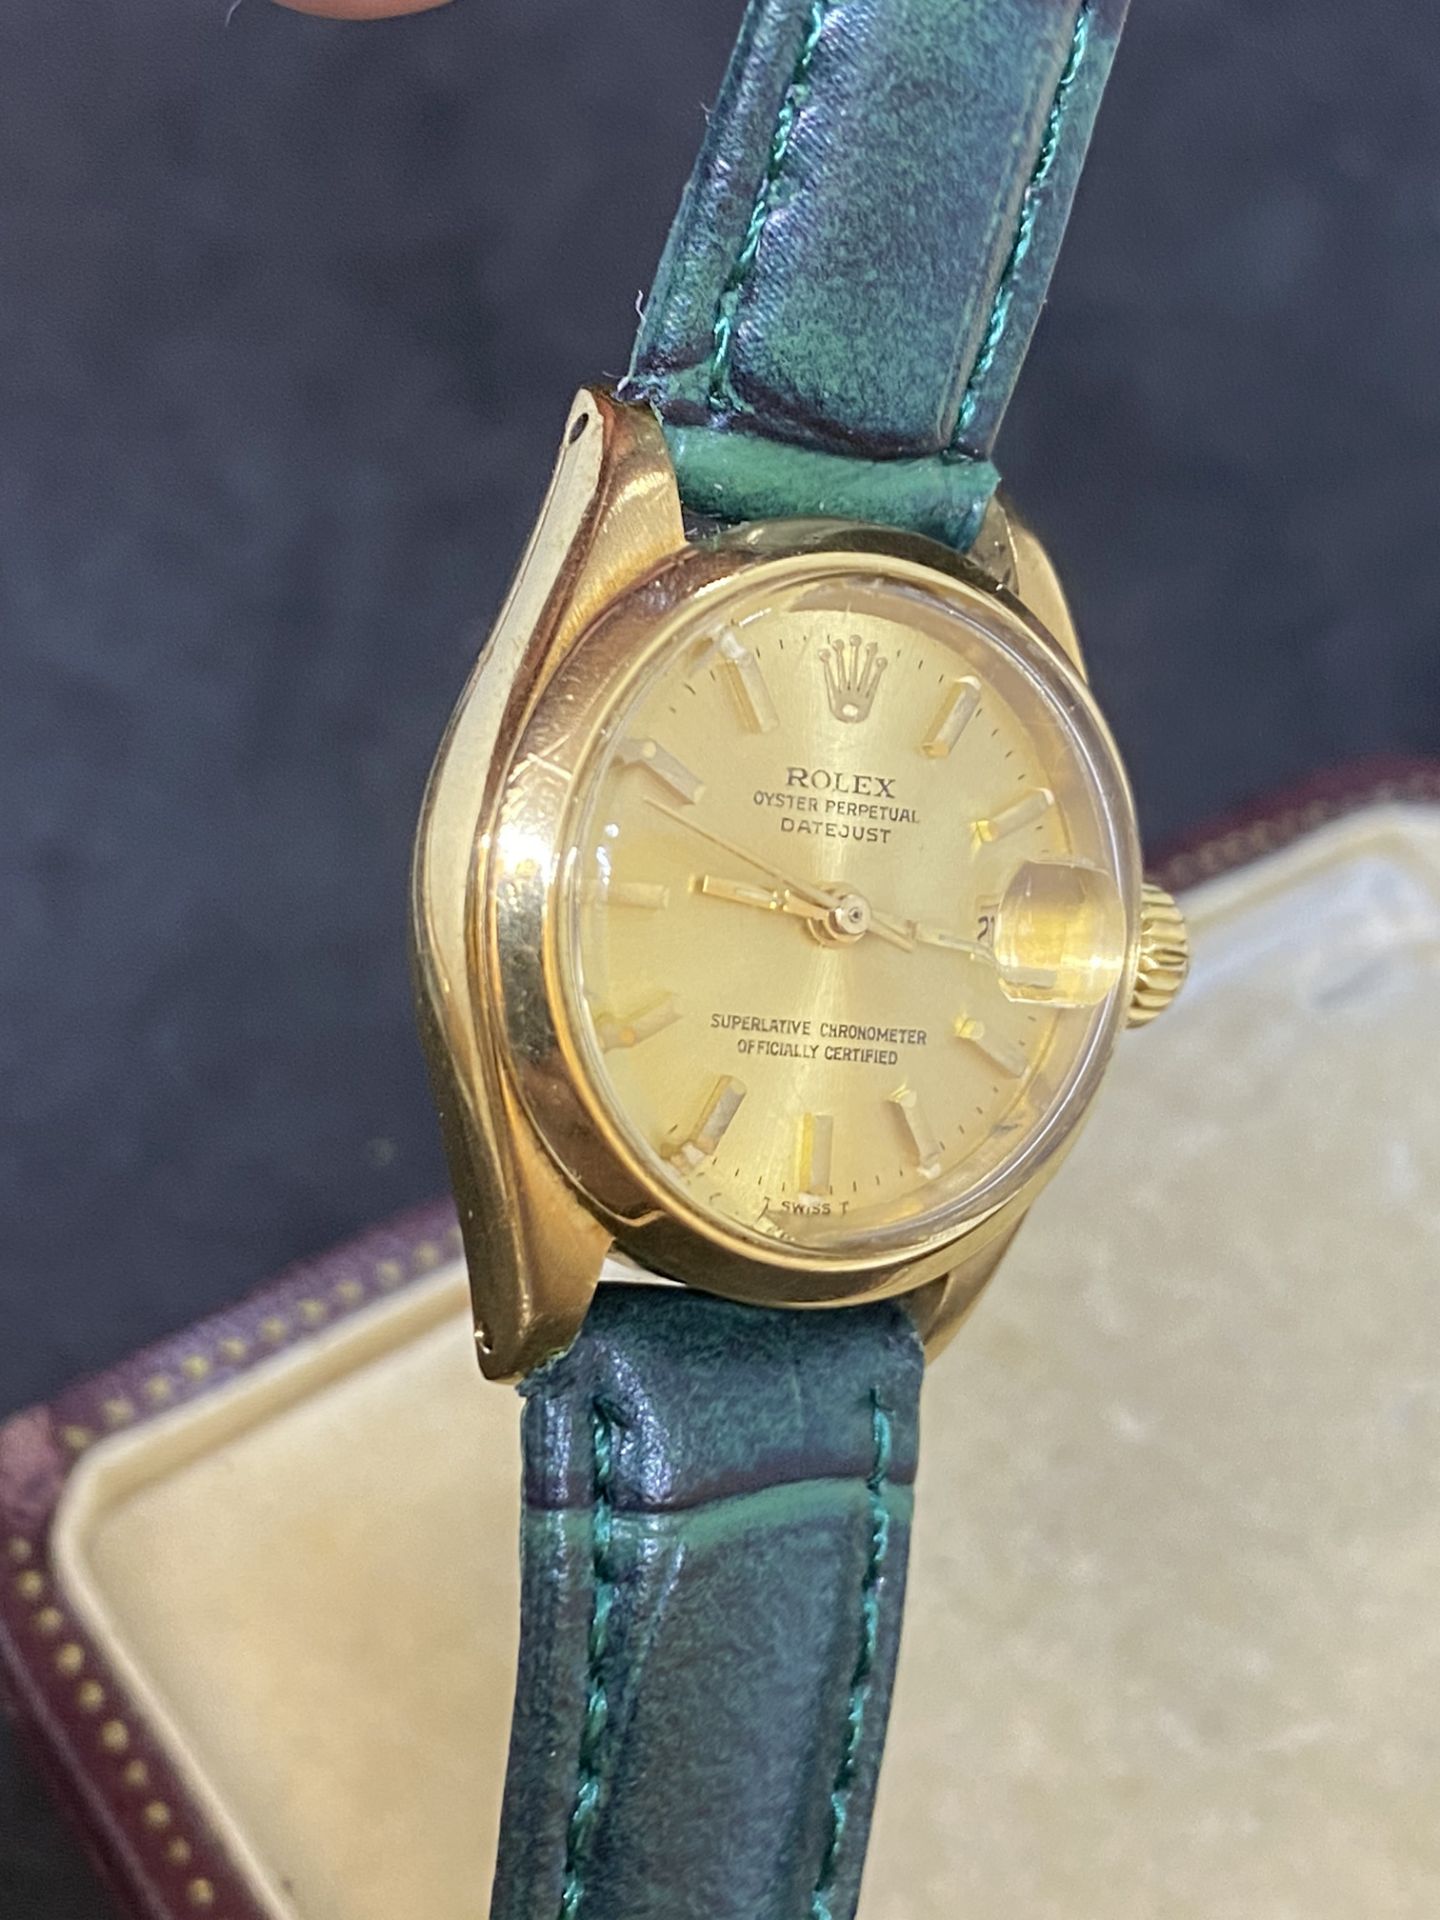 18ct GOLD ROLEX WATCH ON LEATHER STRAP - Image 6 of 8